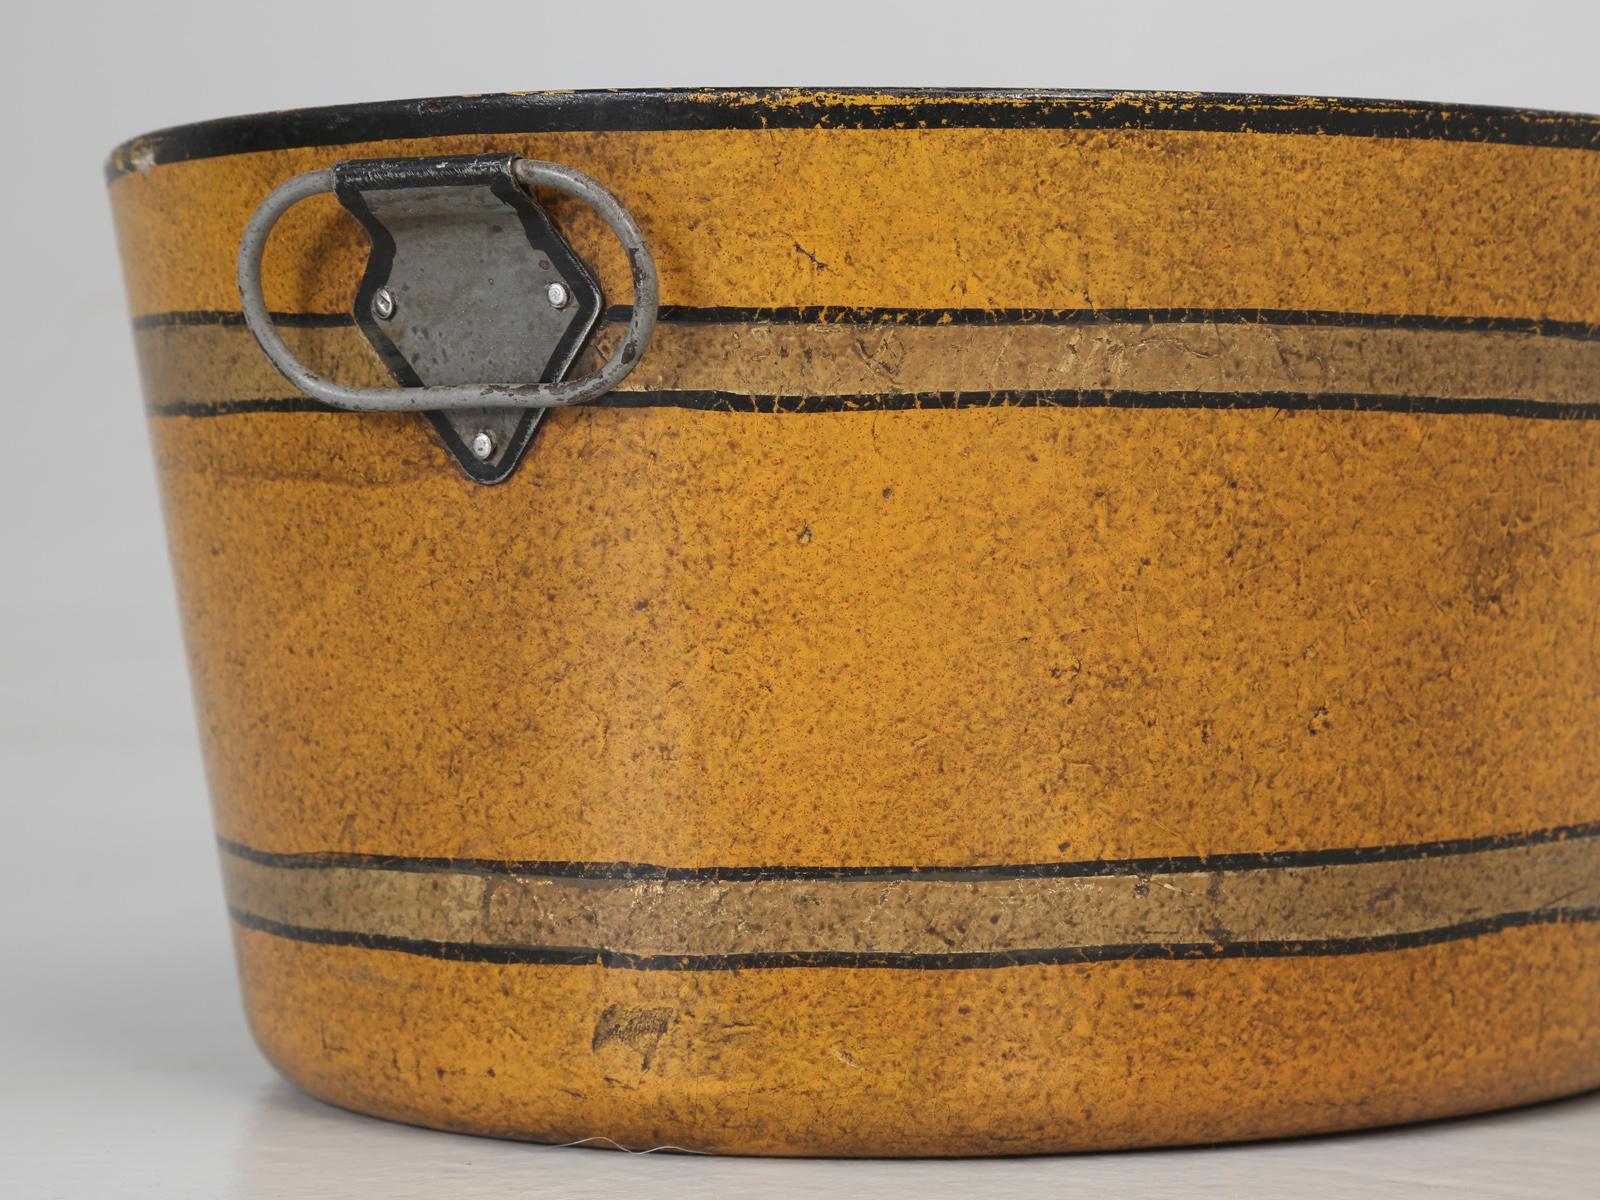 Composition Antique French Paper-Mâché Bucket in a Beautiful Ochre Color, 1stdibs New York For Sale